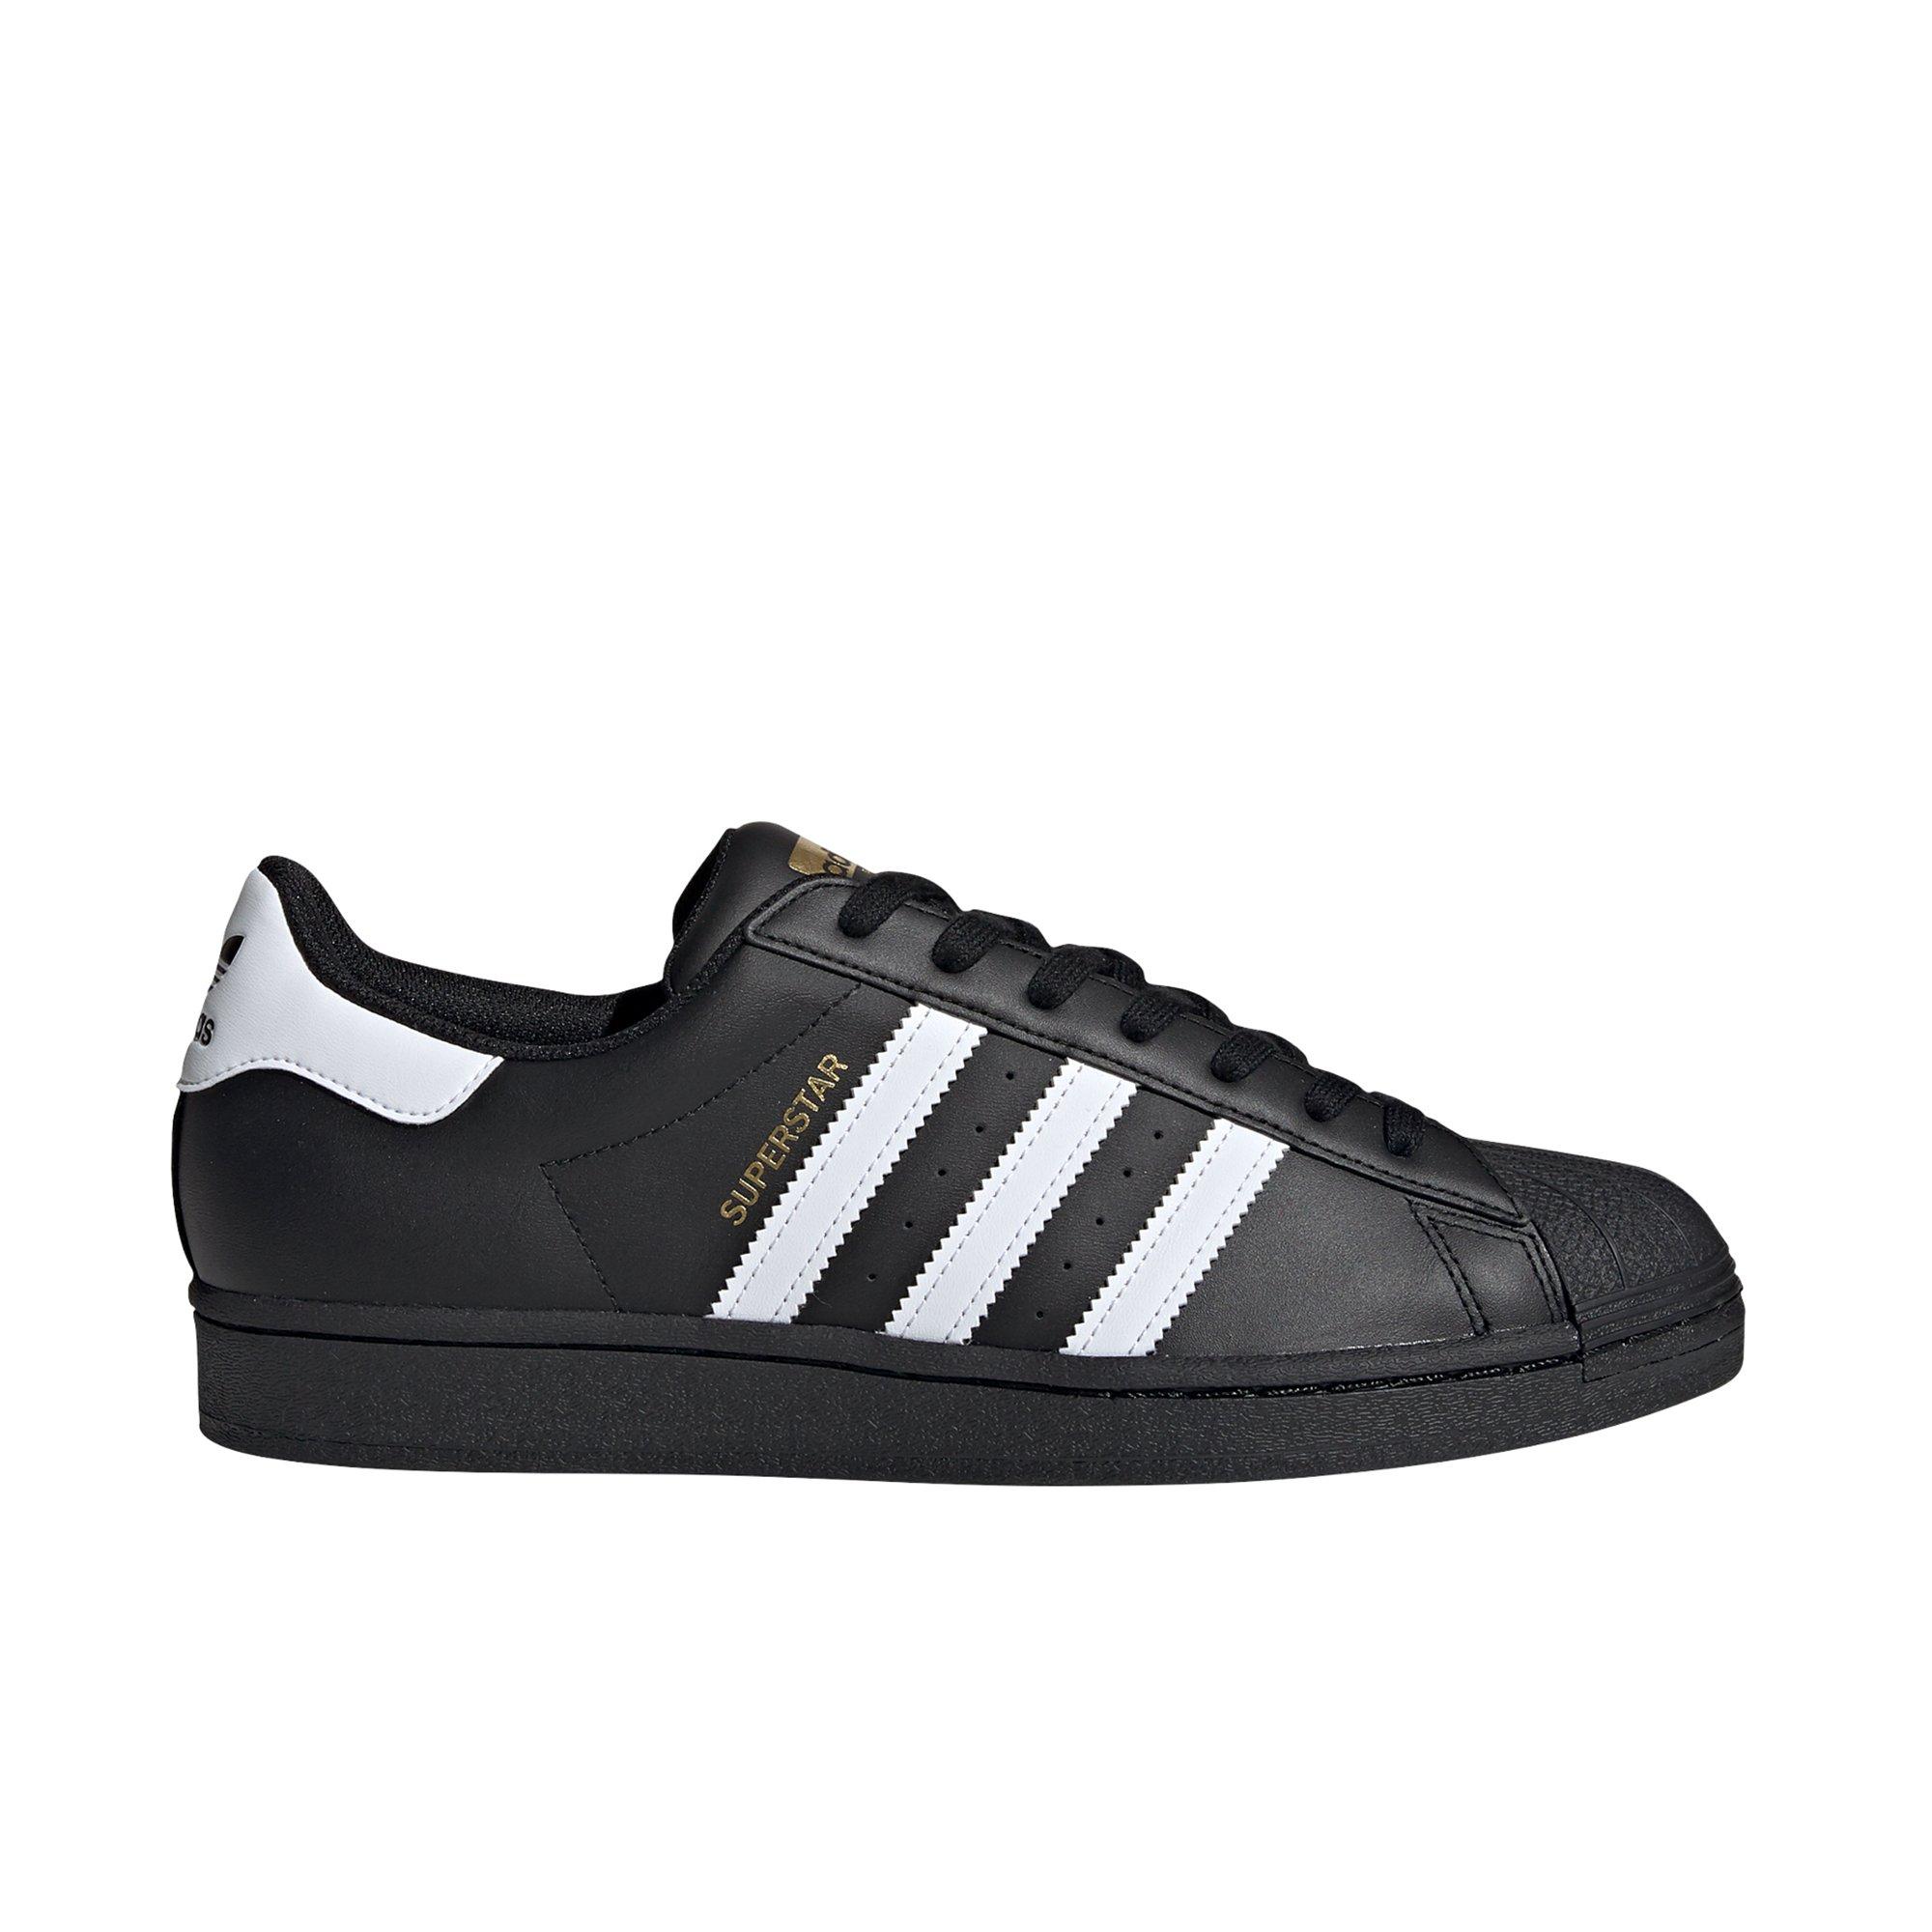 white and black superstar adidas